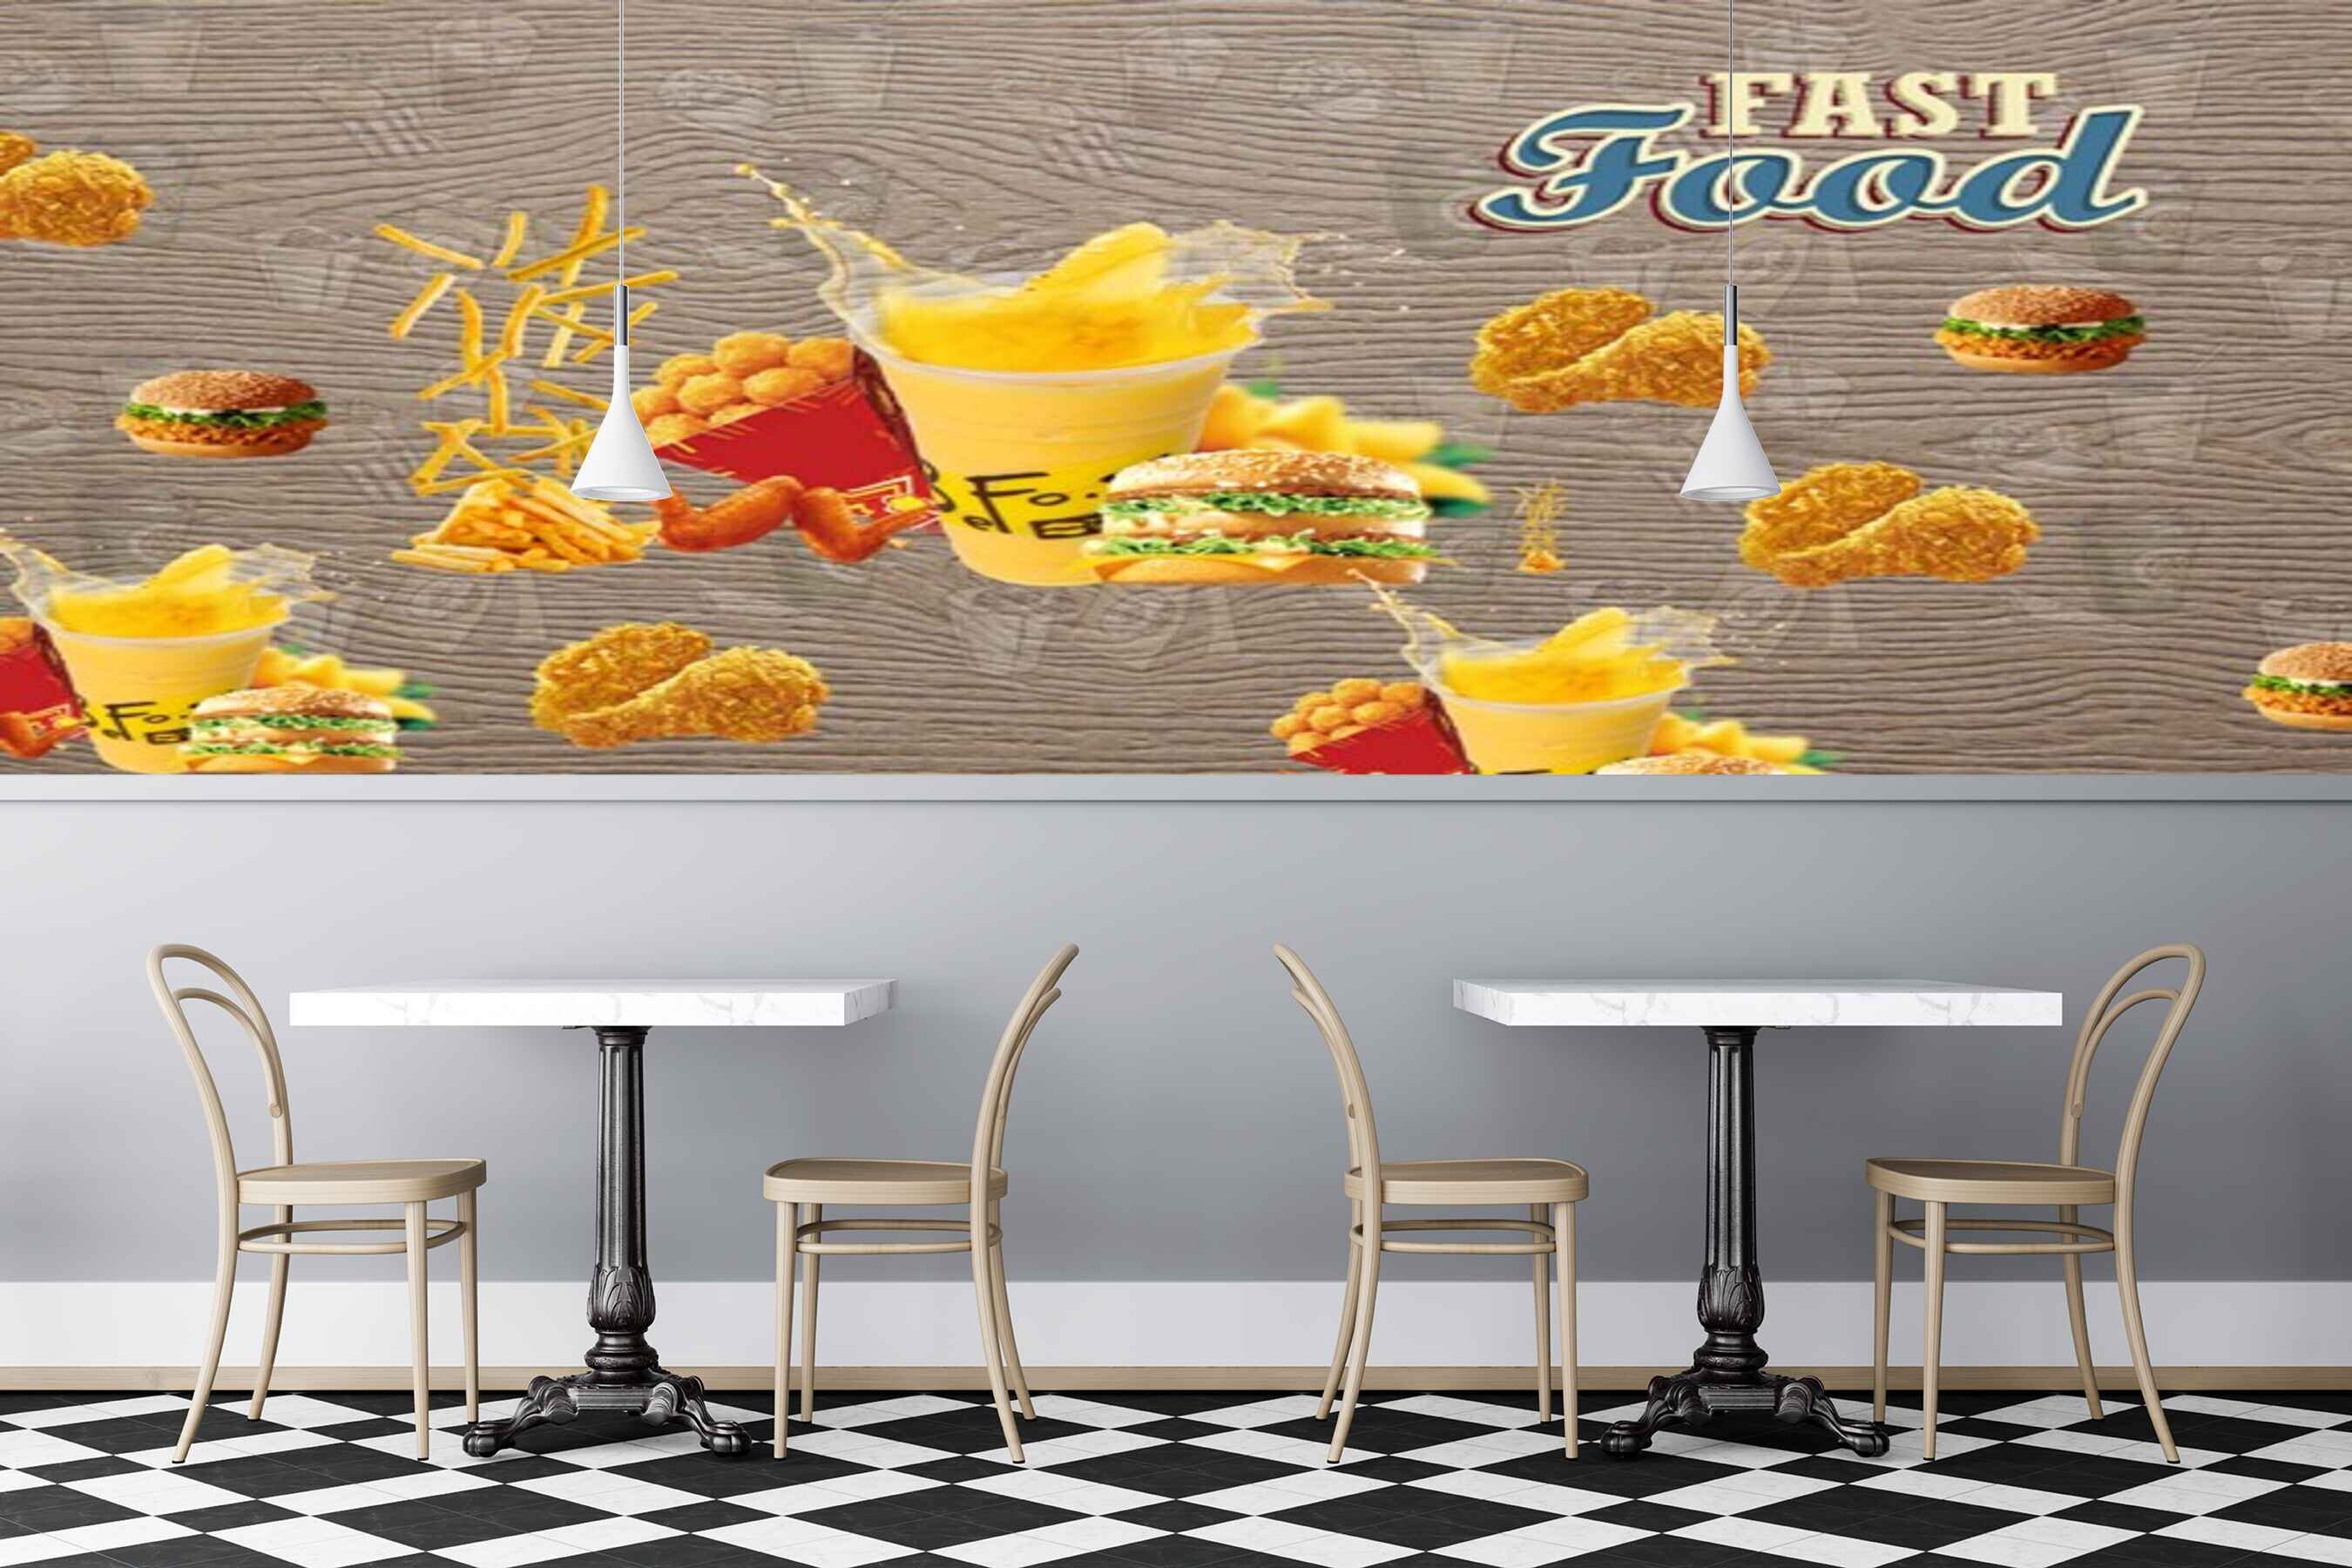 Avikalp MWZ3022 Fast Food Burger Chicken Wings French Fries HD Wallpaper for Cafe Restaurant